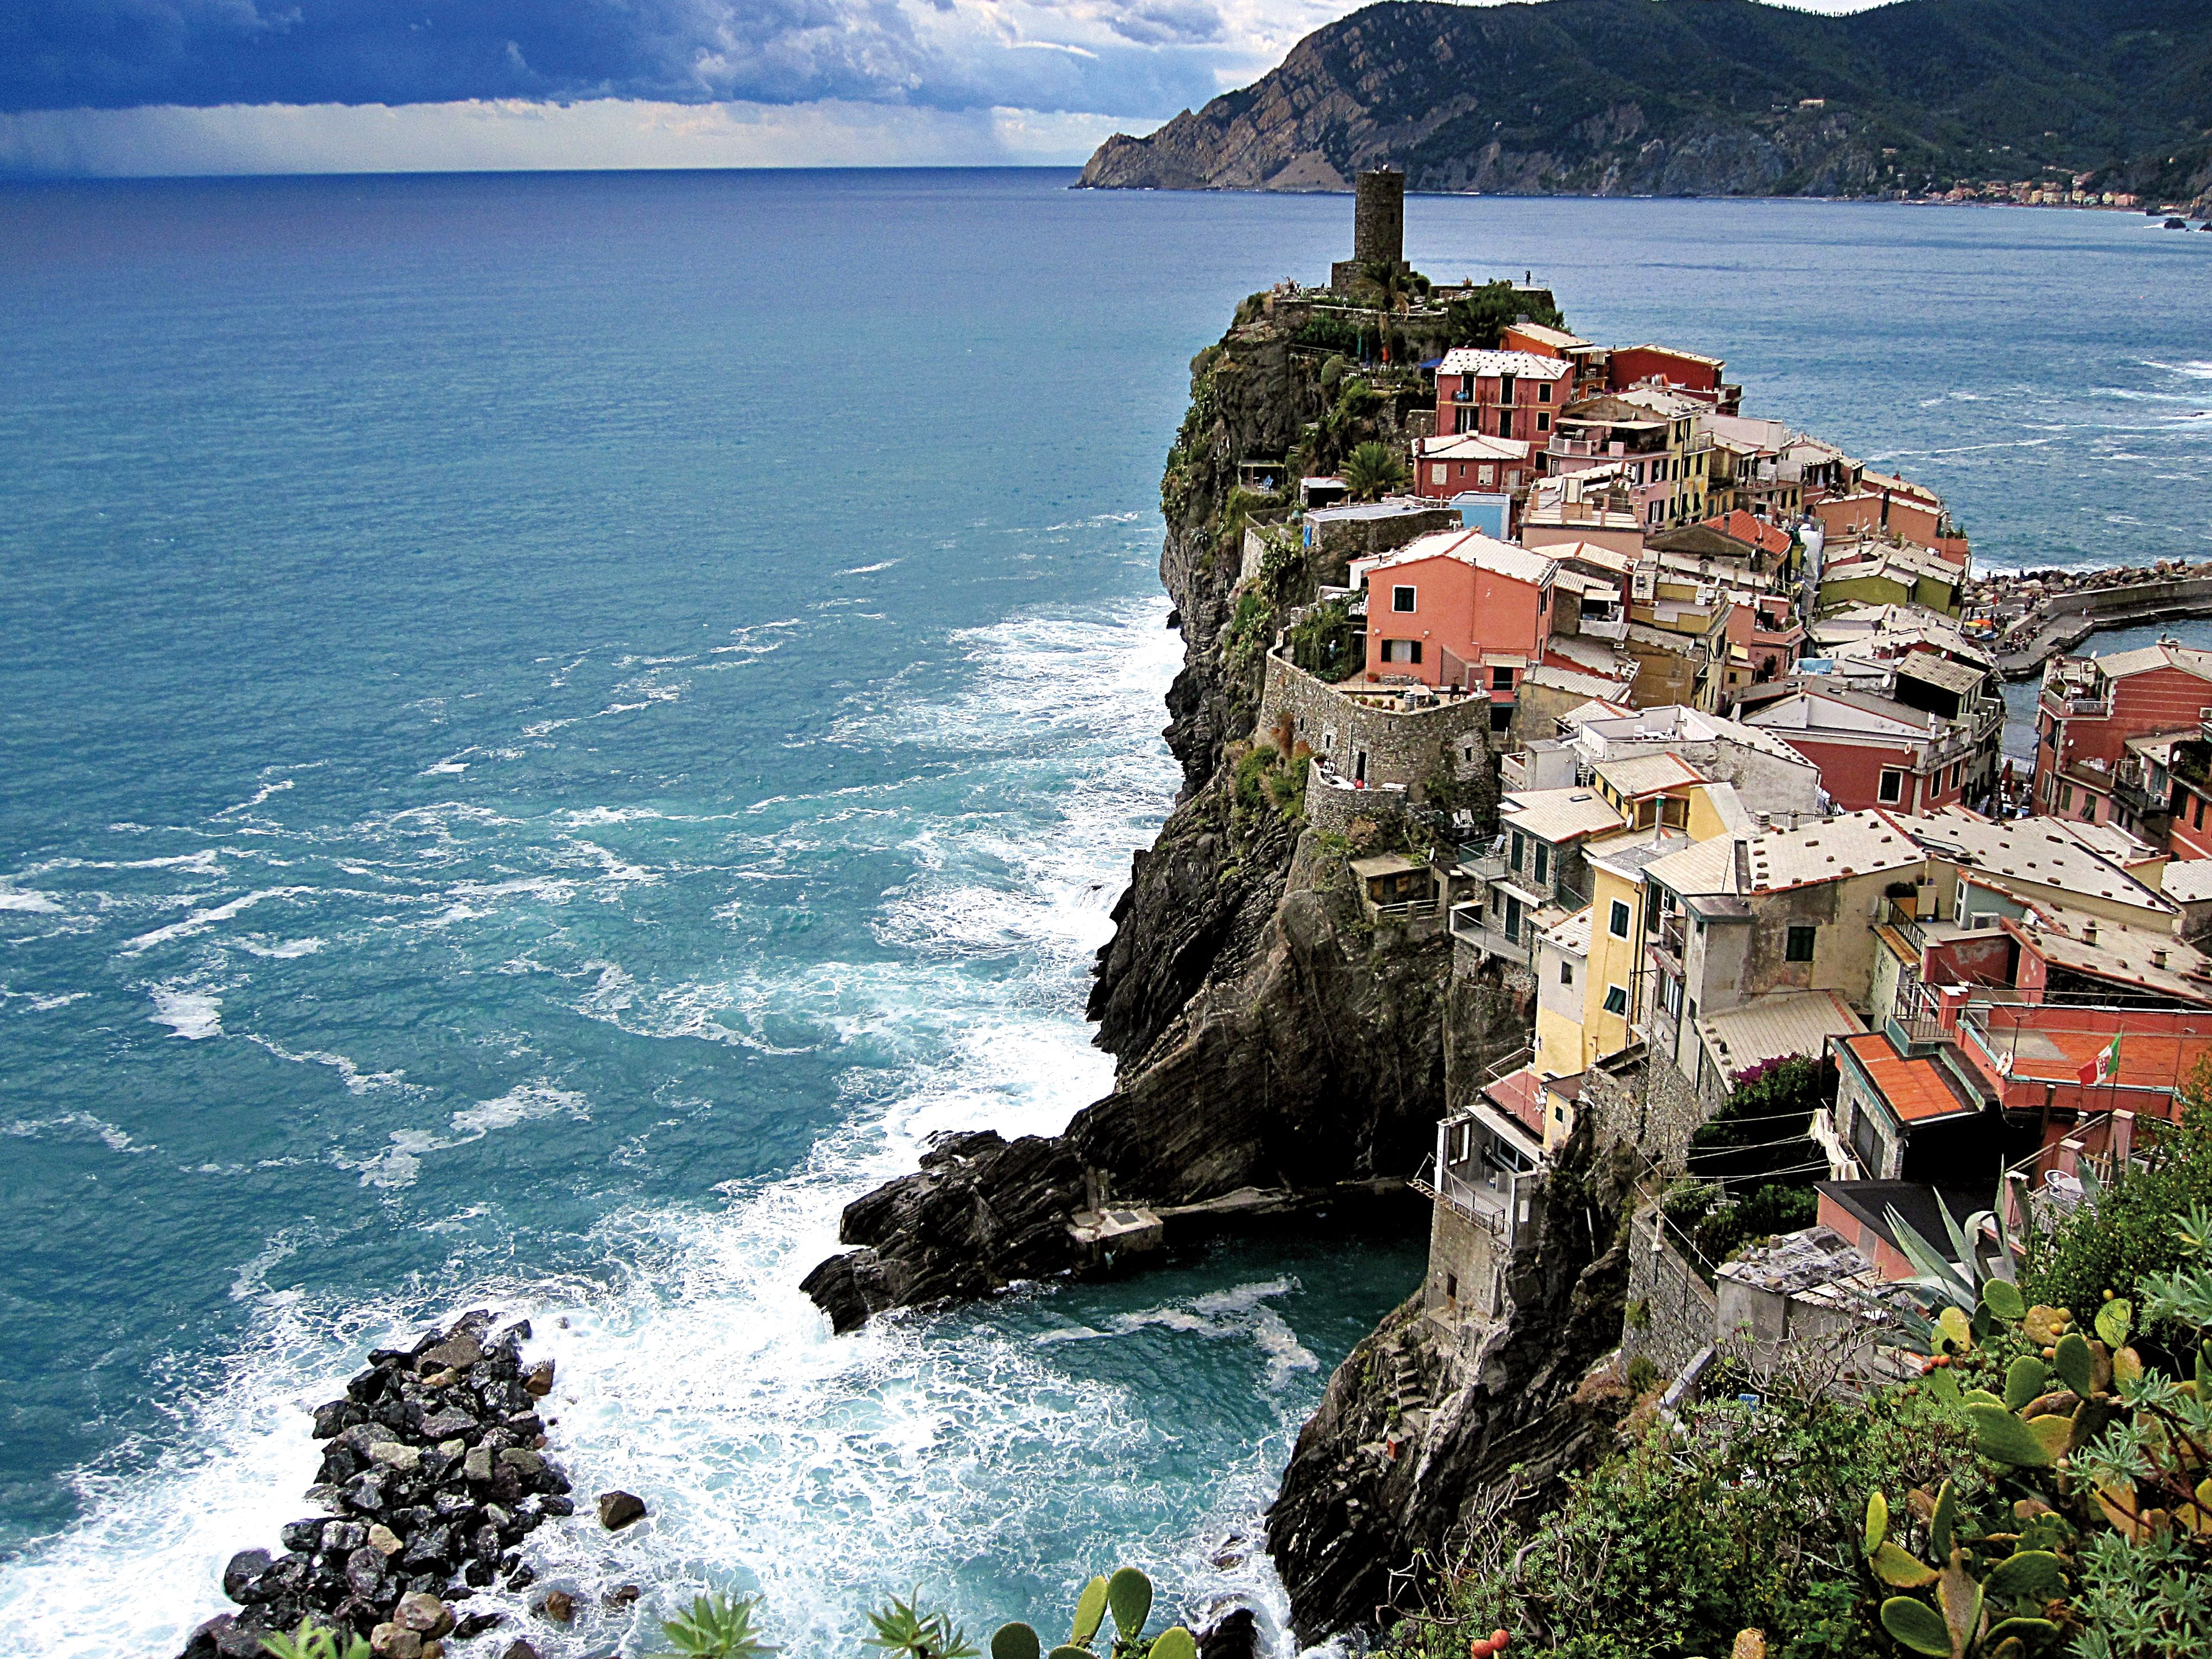 A village on a cliff against the sea in Italy.